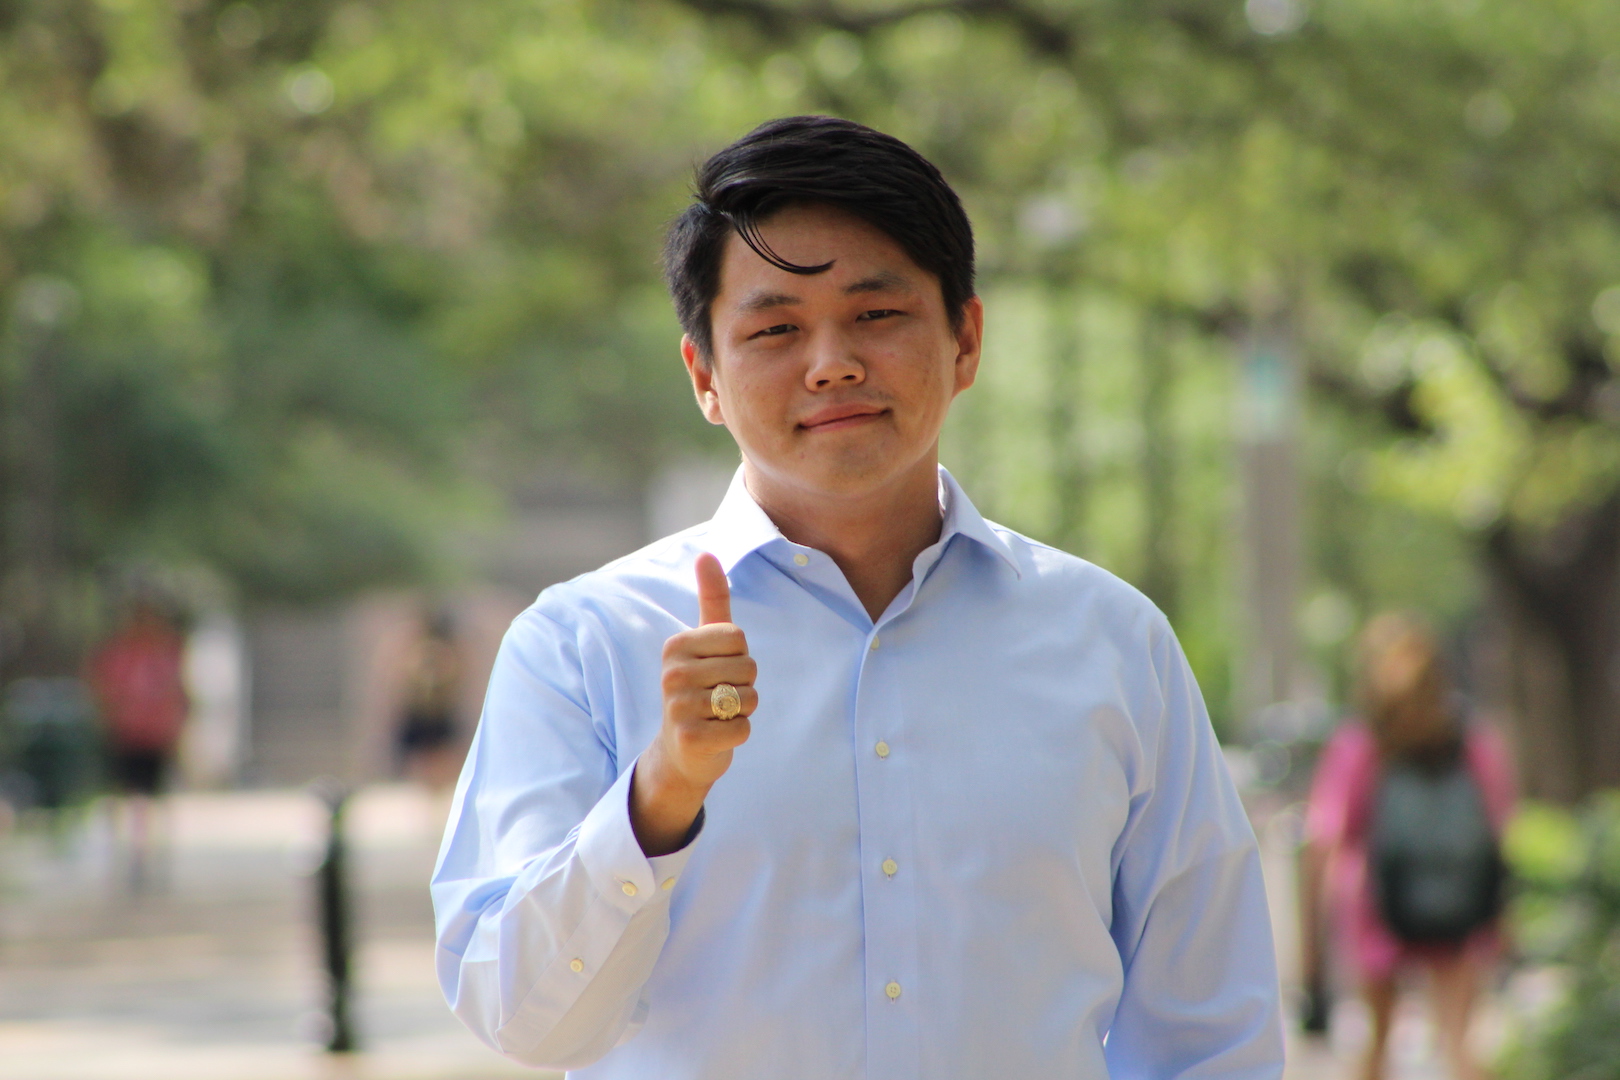 Male student of asian descent with long-sleeved white button up shirt giving thumbs up with slight smile.